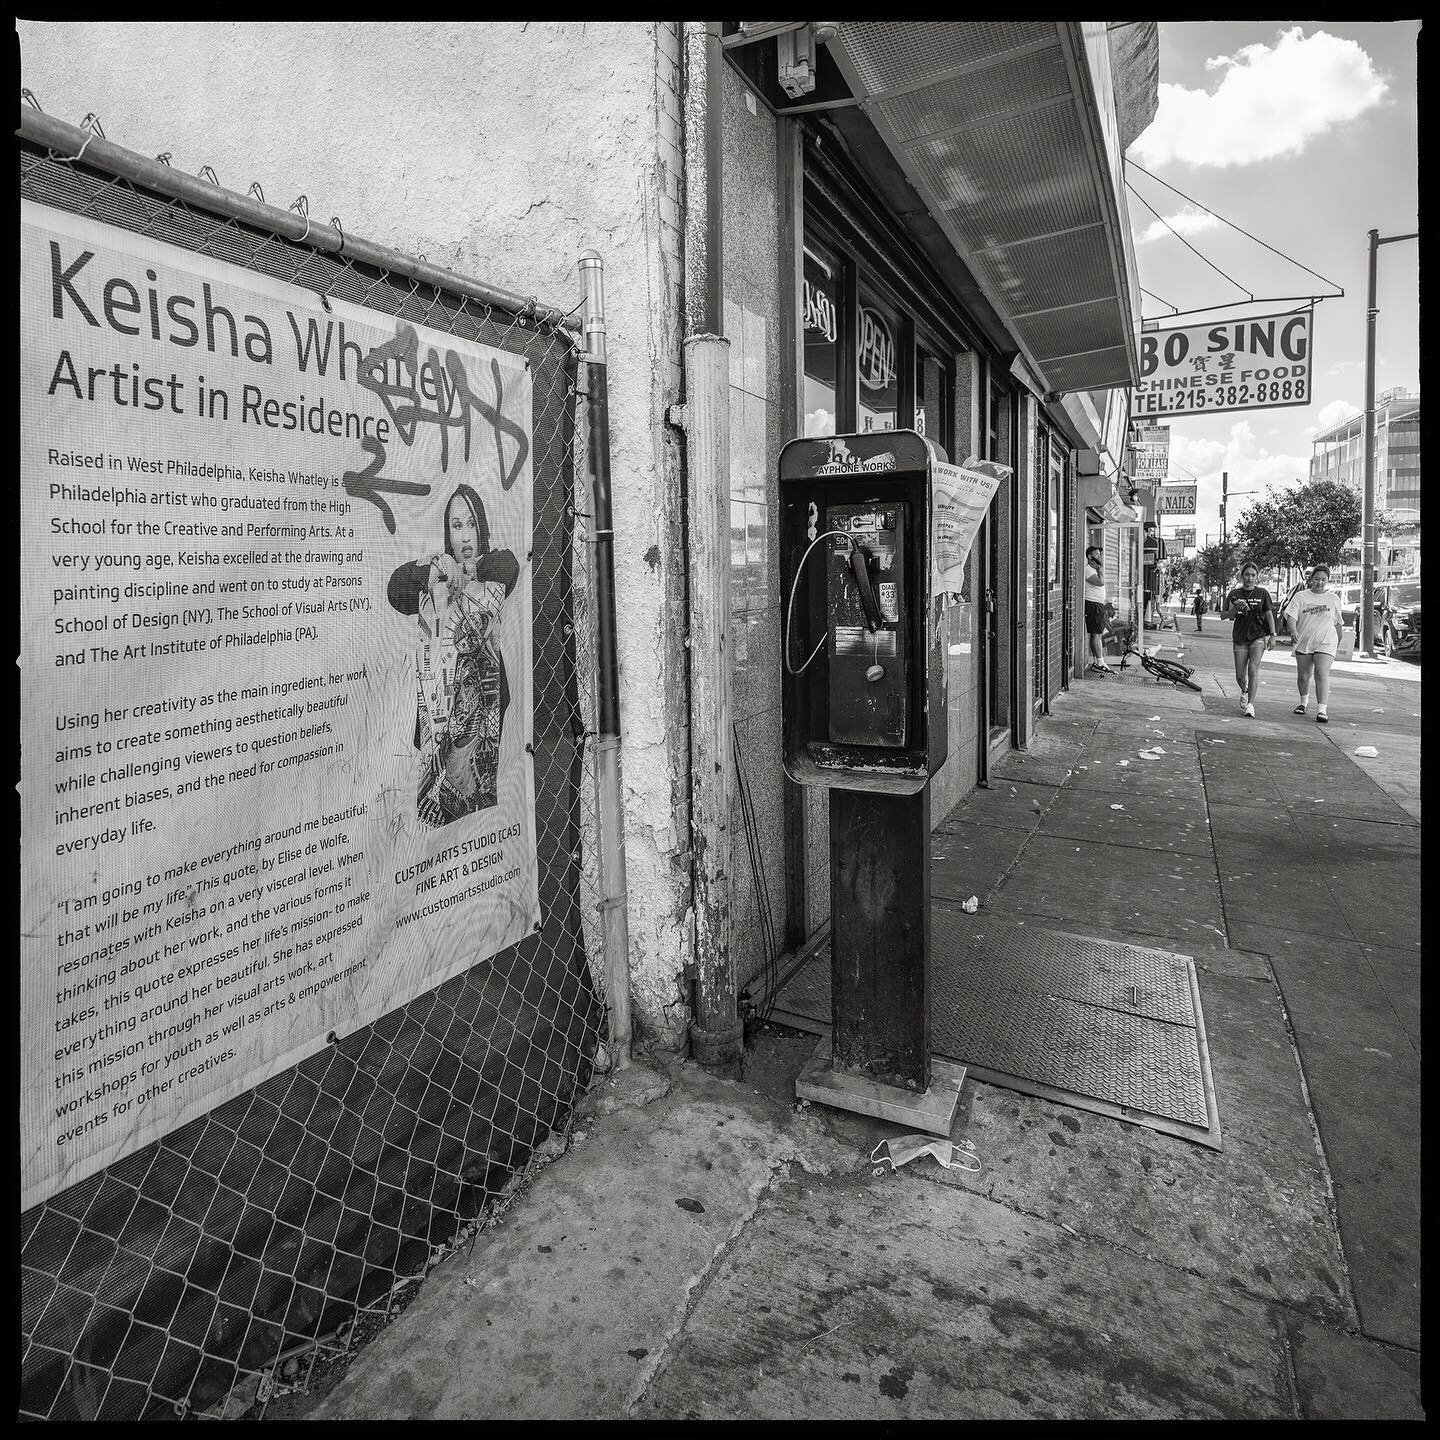 Unknown Number- Crown Fried Chicken, 4002 Market St, Philadelphia, PA 19104

 
Another image for &ldquo;Life-Lines Throughout the United States&rdquo; from Philadelphia, PA.
.
.
.

#lifelinesthroughouttheus #payphones #workingpayphones #workingpaypho